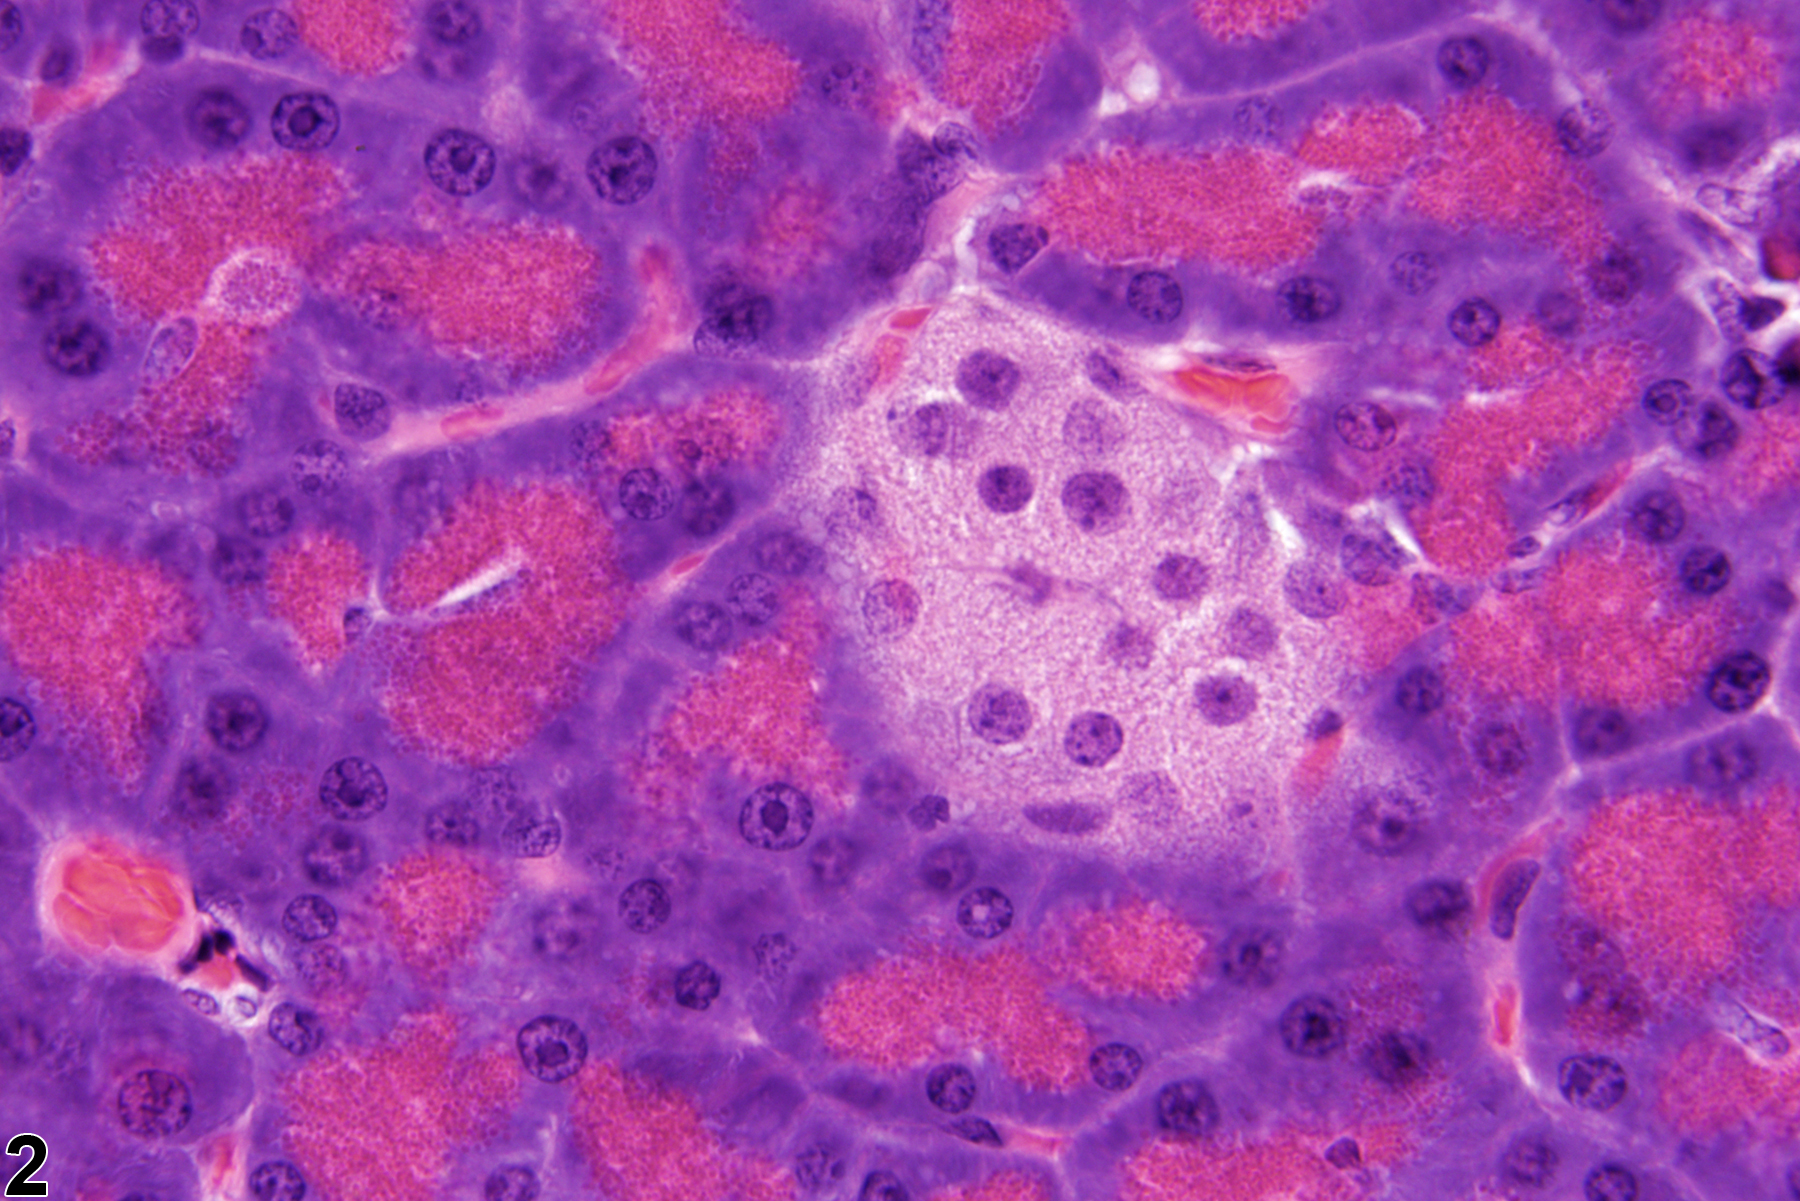 Image of hypoplasia in the pancreatic islet from a female F344/N rat in a chronic study